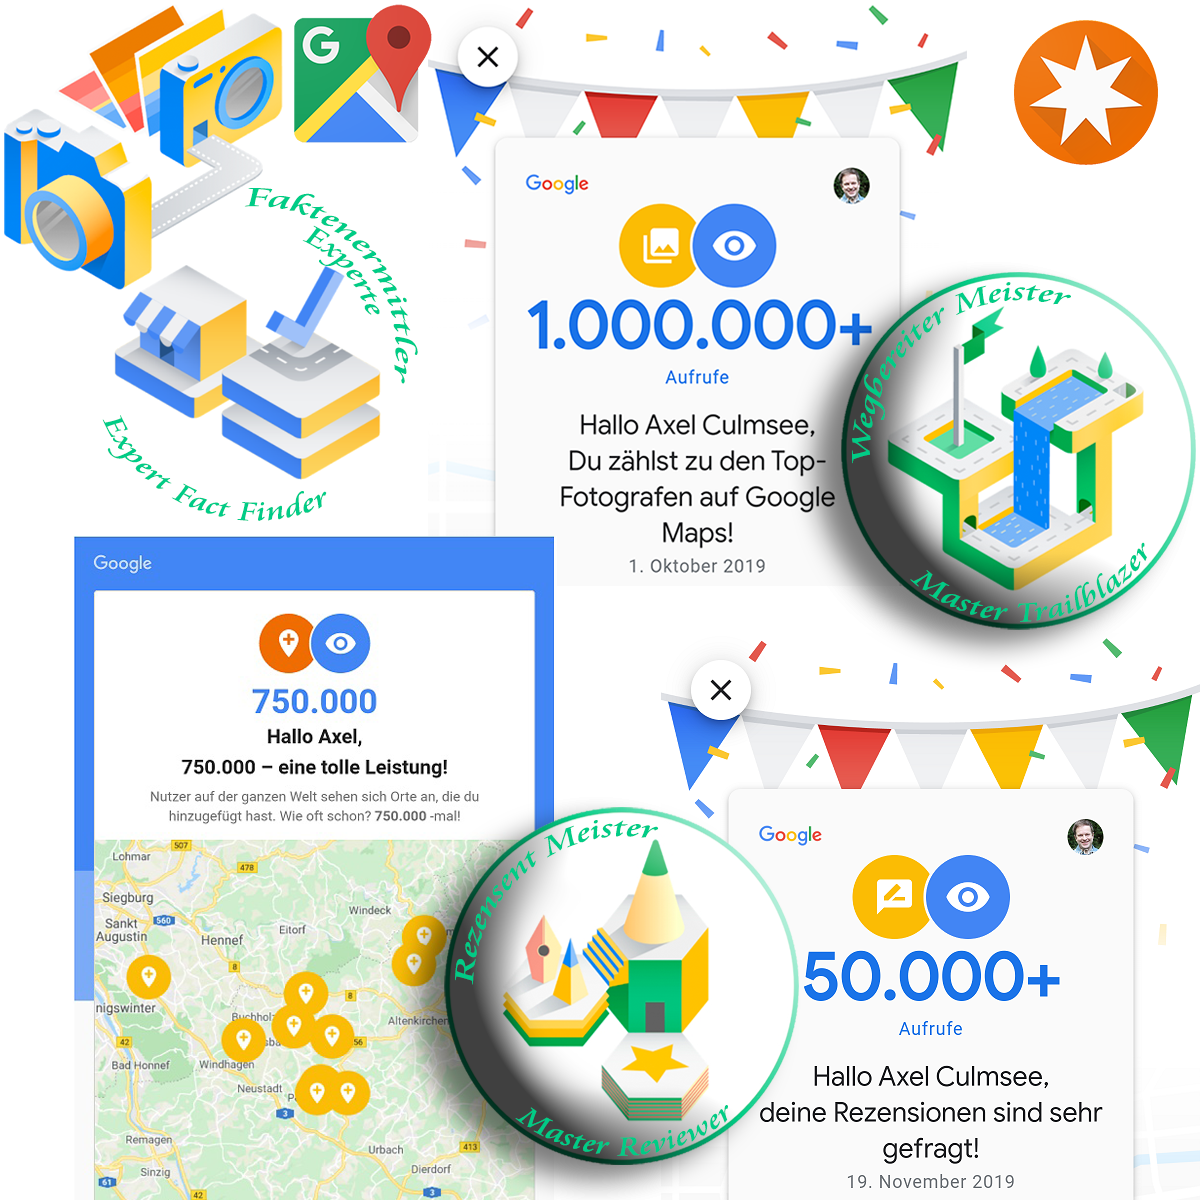 Google Maps Local Guide duo-master and more